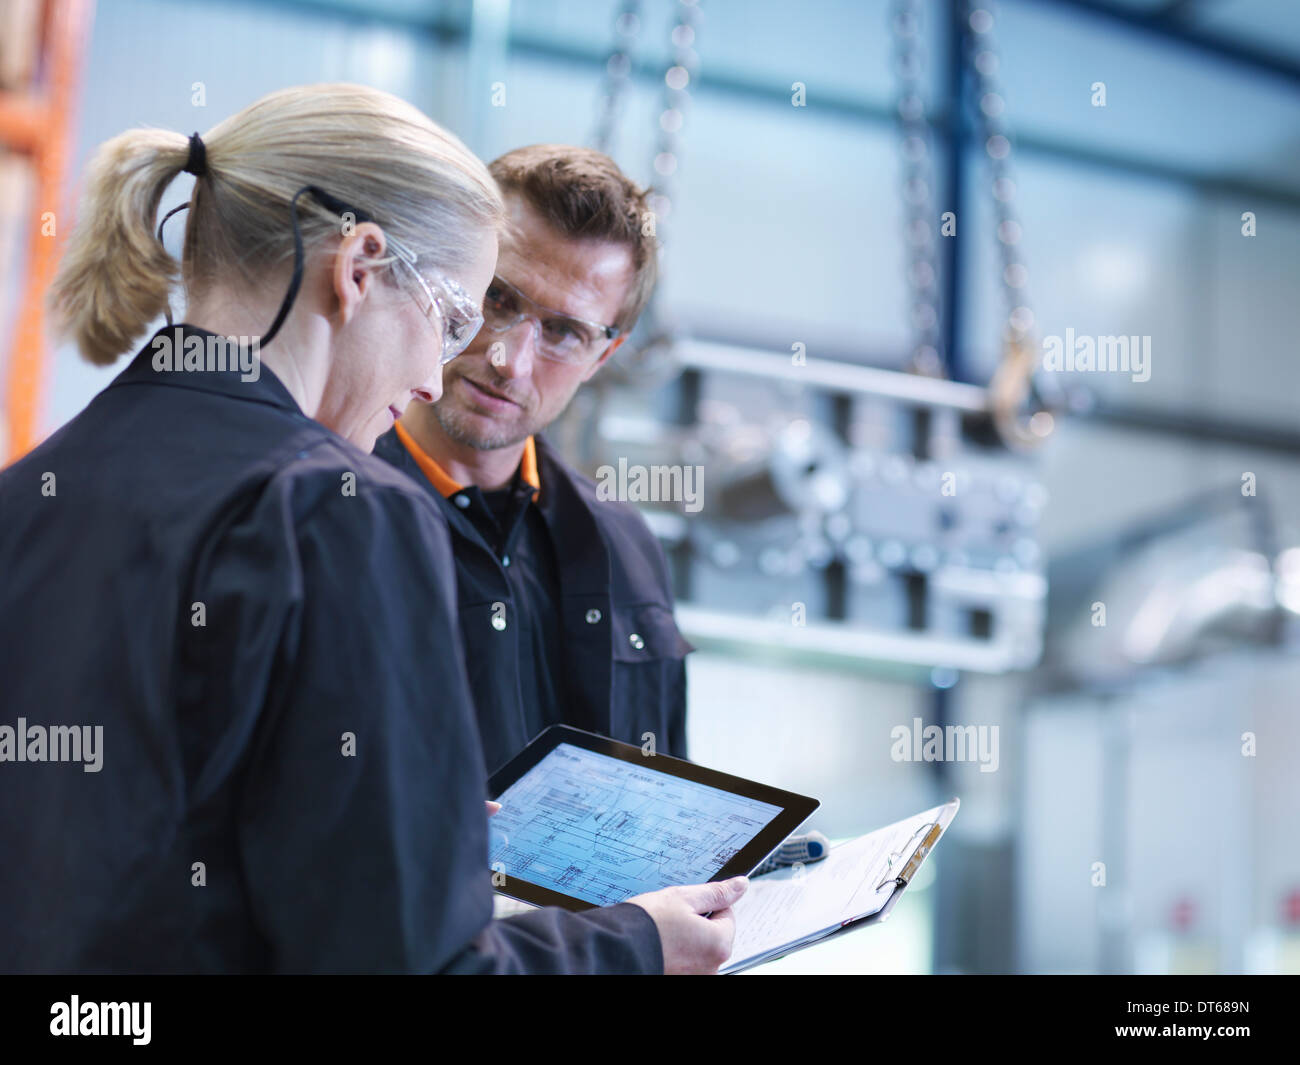 Engineers inspect plans on digital tablet in engineering factory Stock Photo